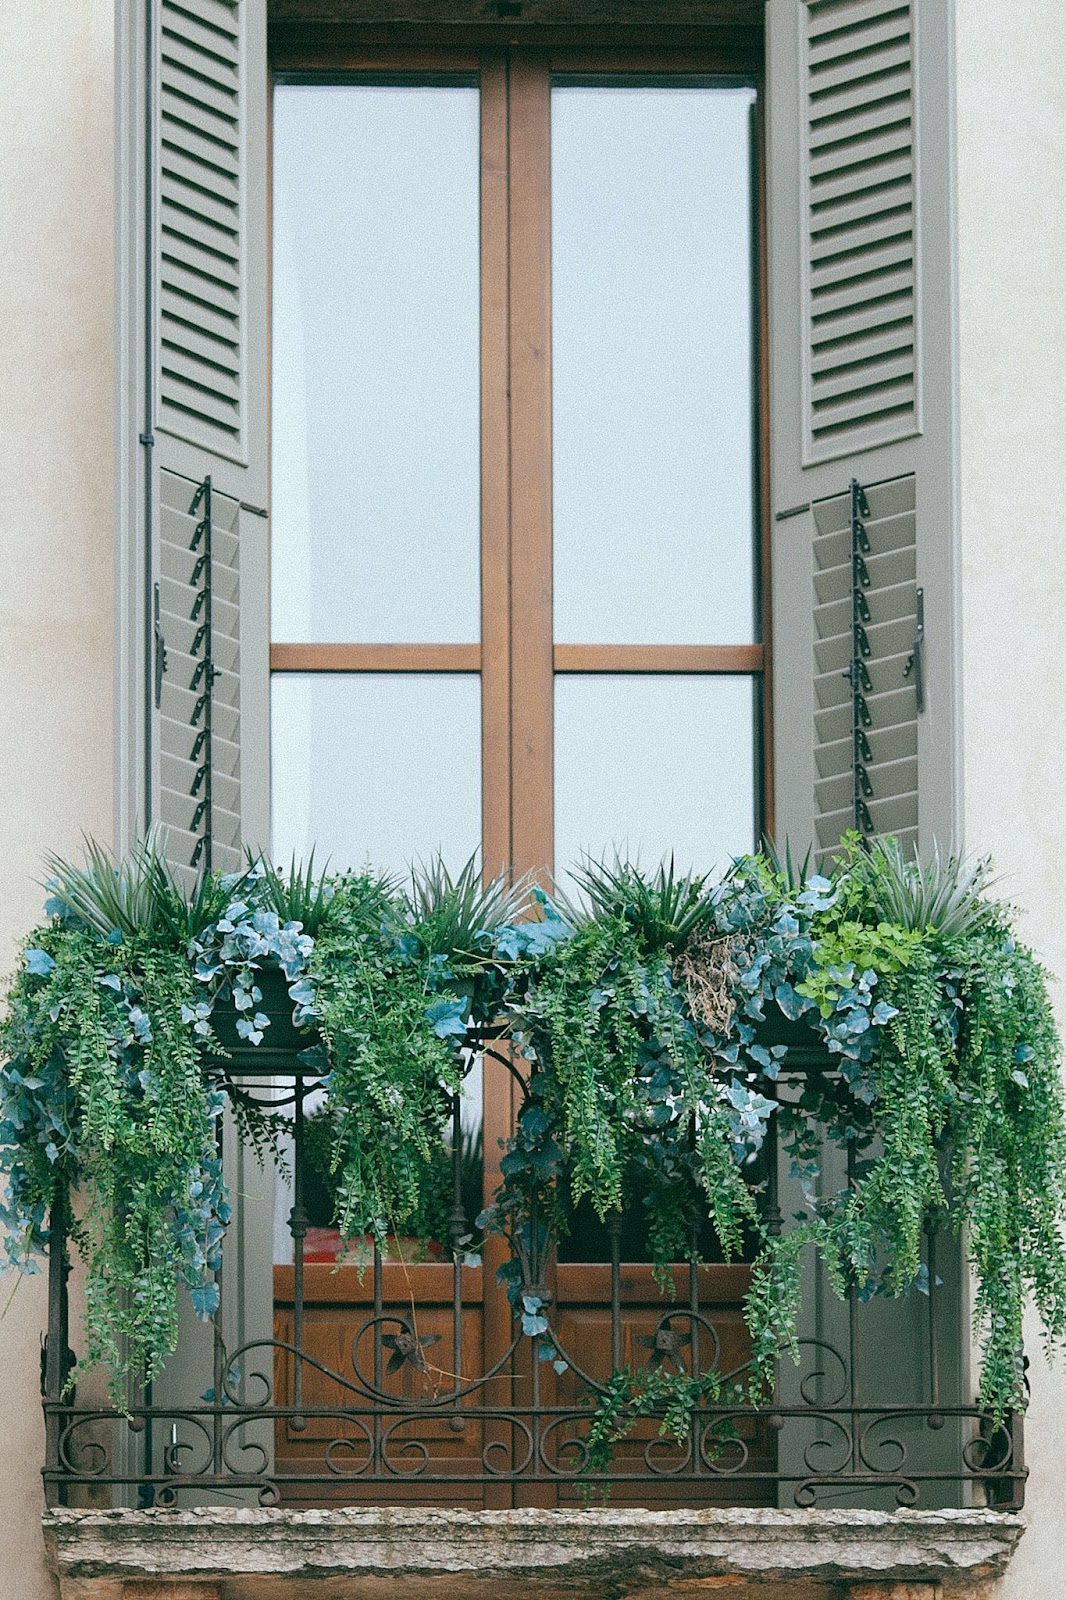 Small balcony with its railing decorated with hanging plants